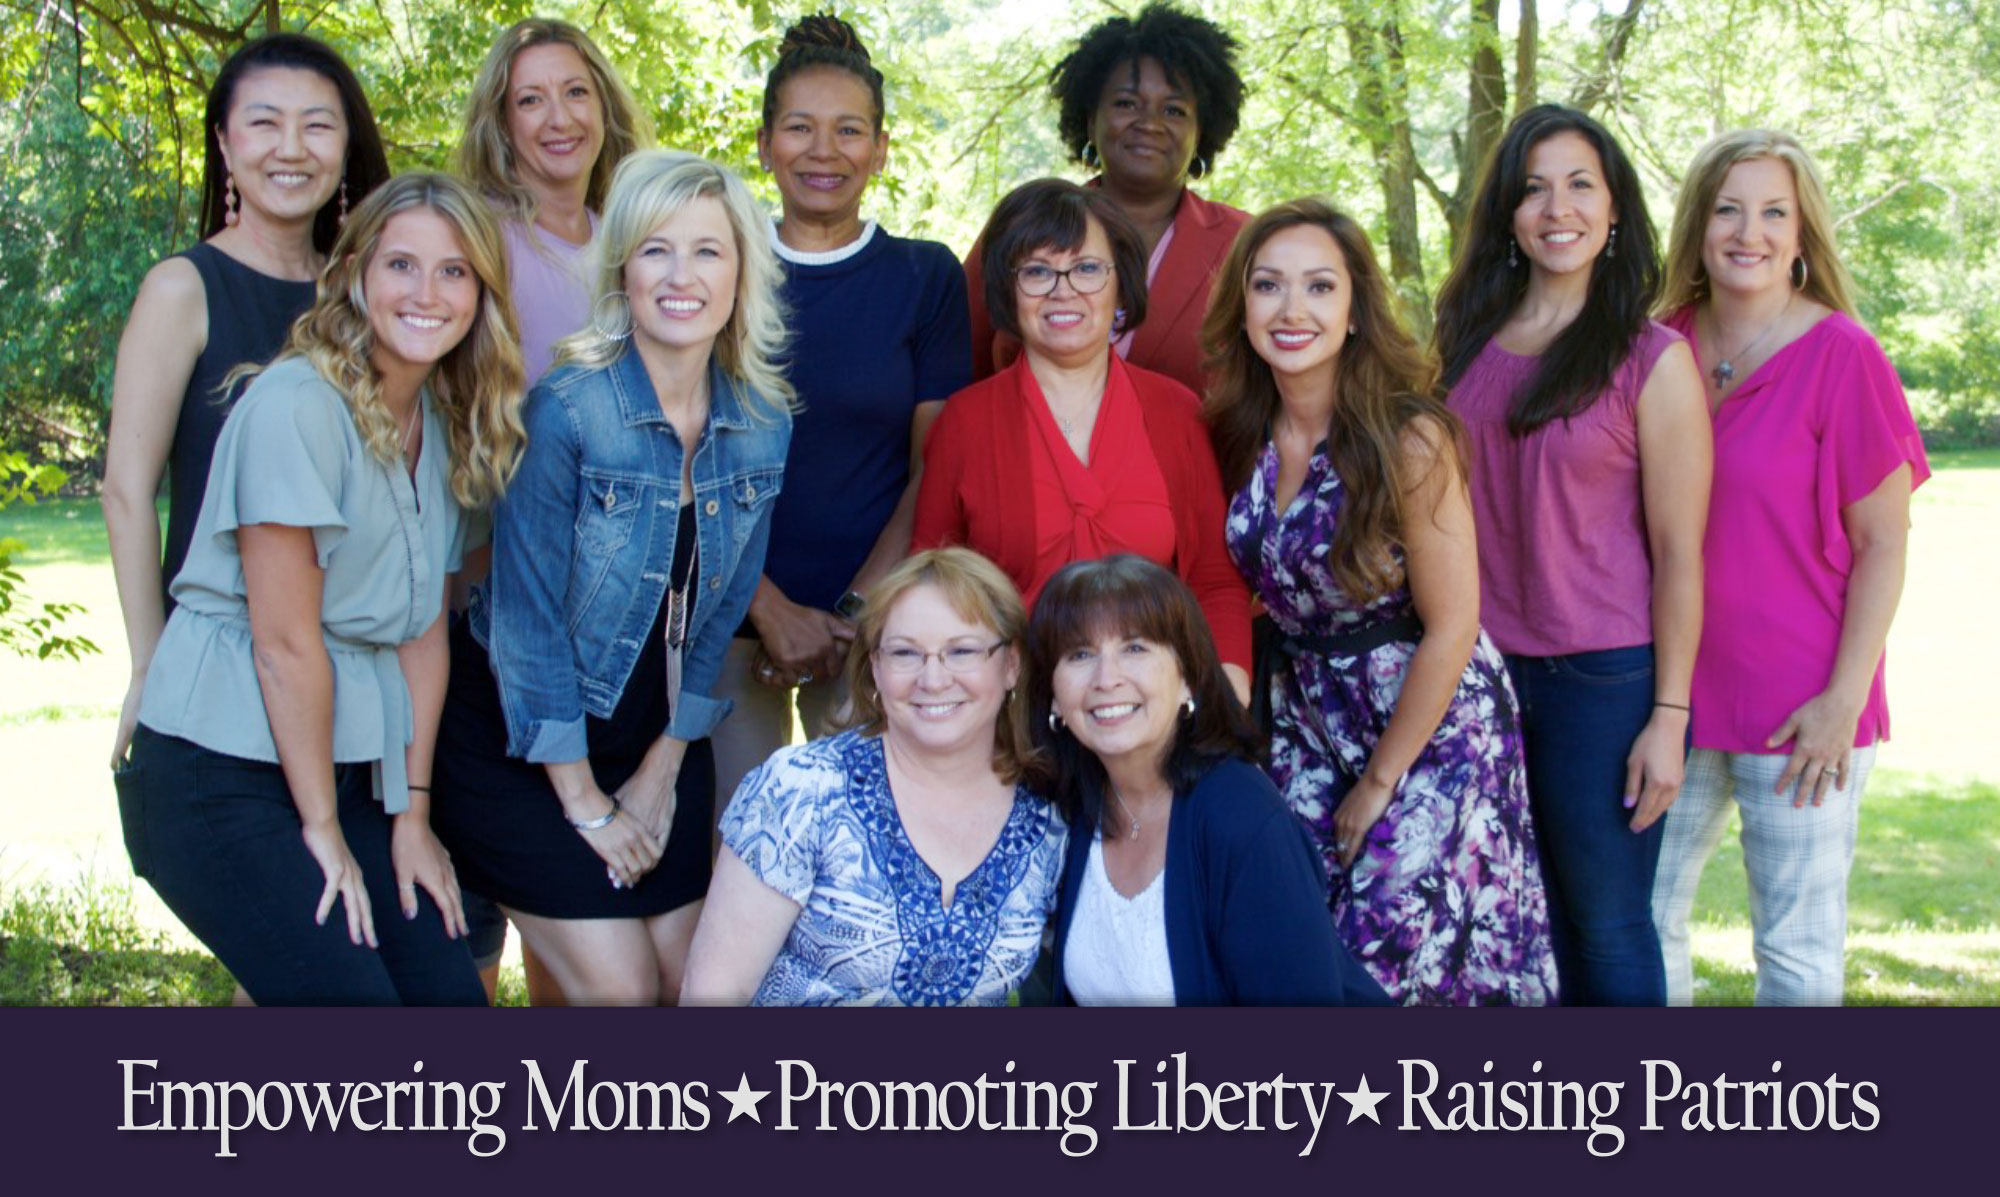 Our Story - Moms for America